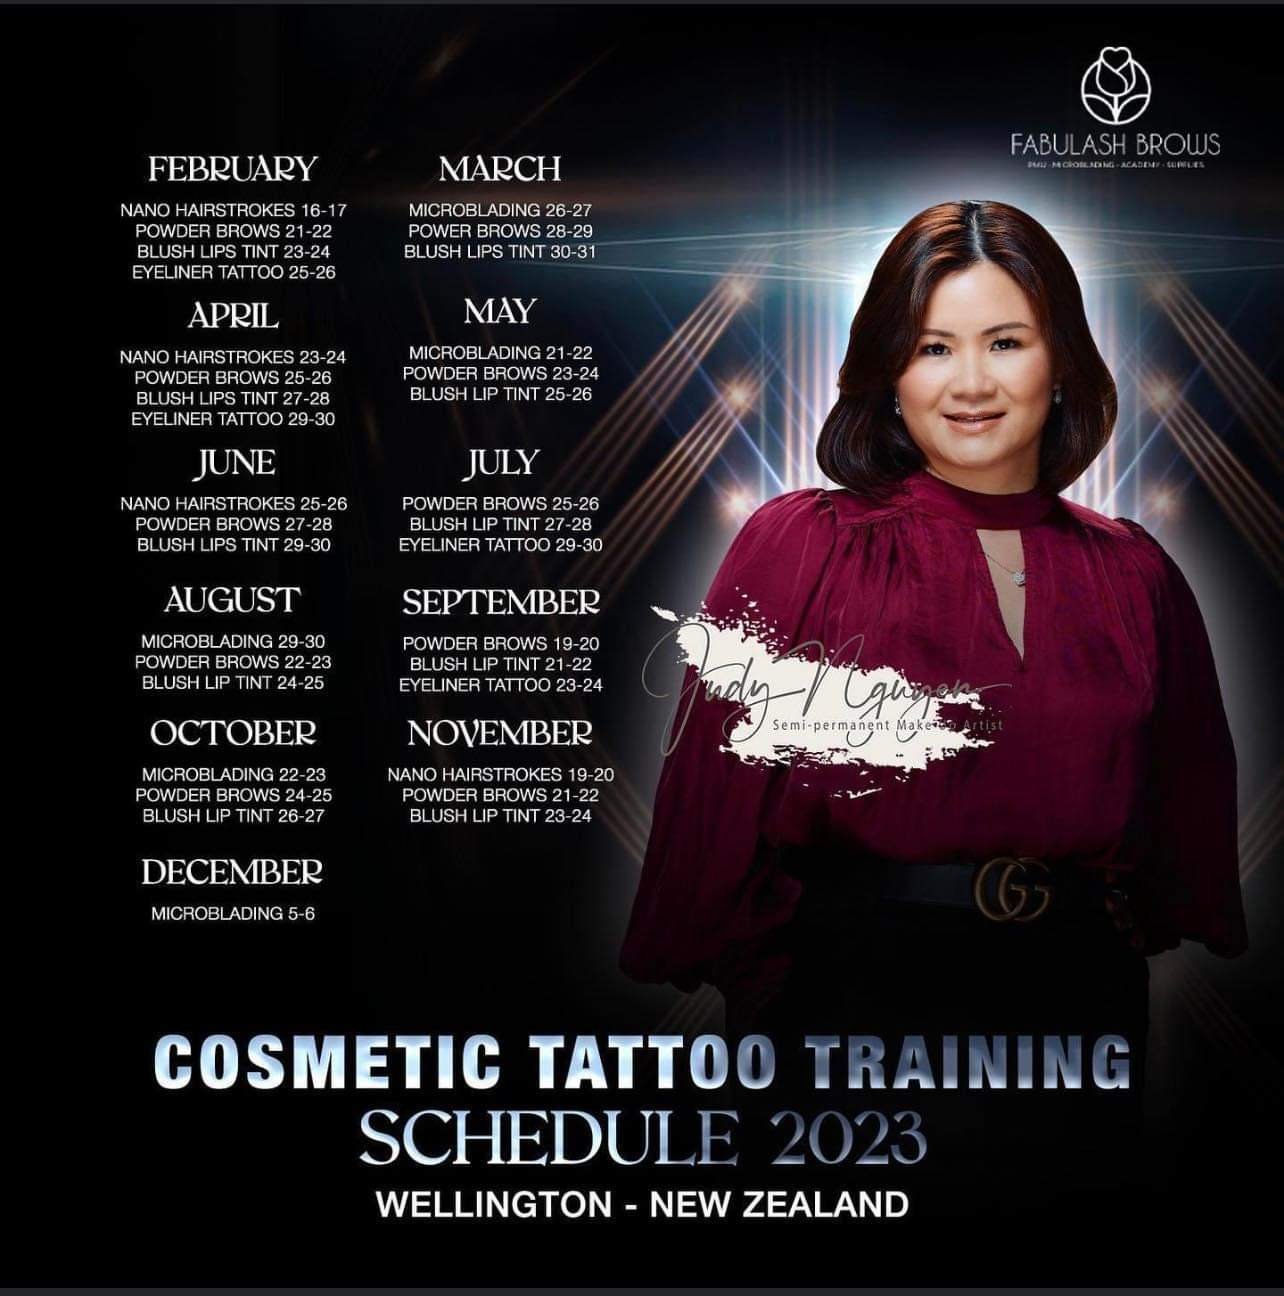 THink Aesthetics  Cosmetic Tattoo Training  COSMETIC TATTOO REMOVAL COURSE  IS NOW LIVE  By popular demand the THink Cosmetic Tattoo Removal Course  is finally available Weve been working on sharing